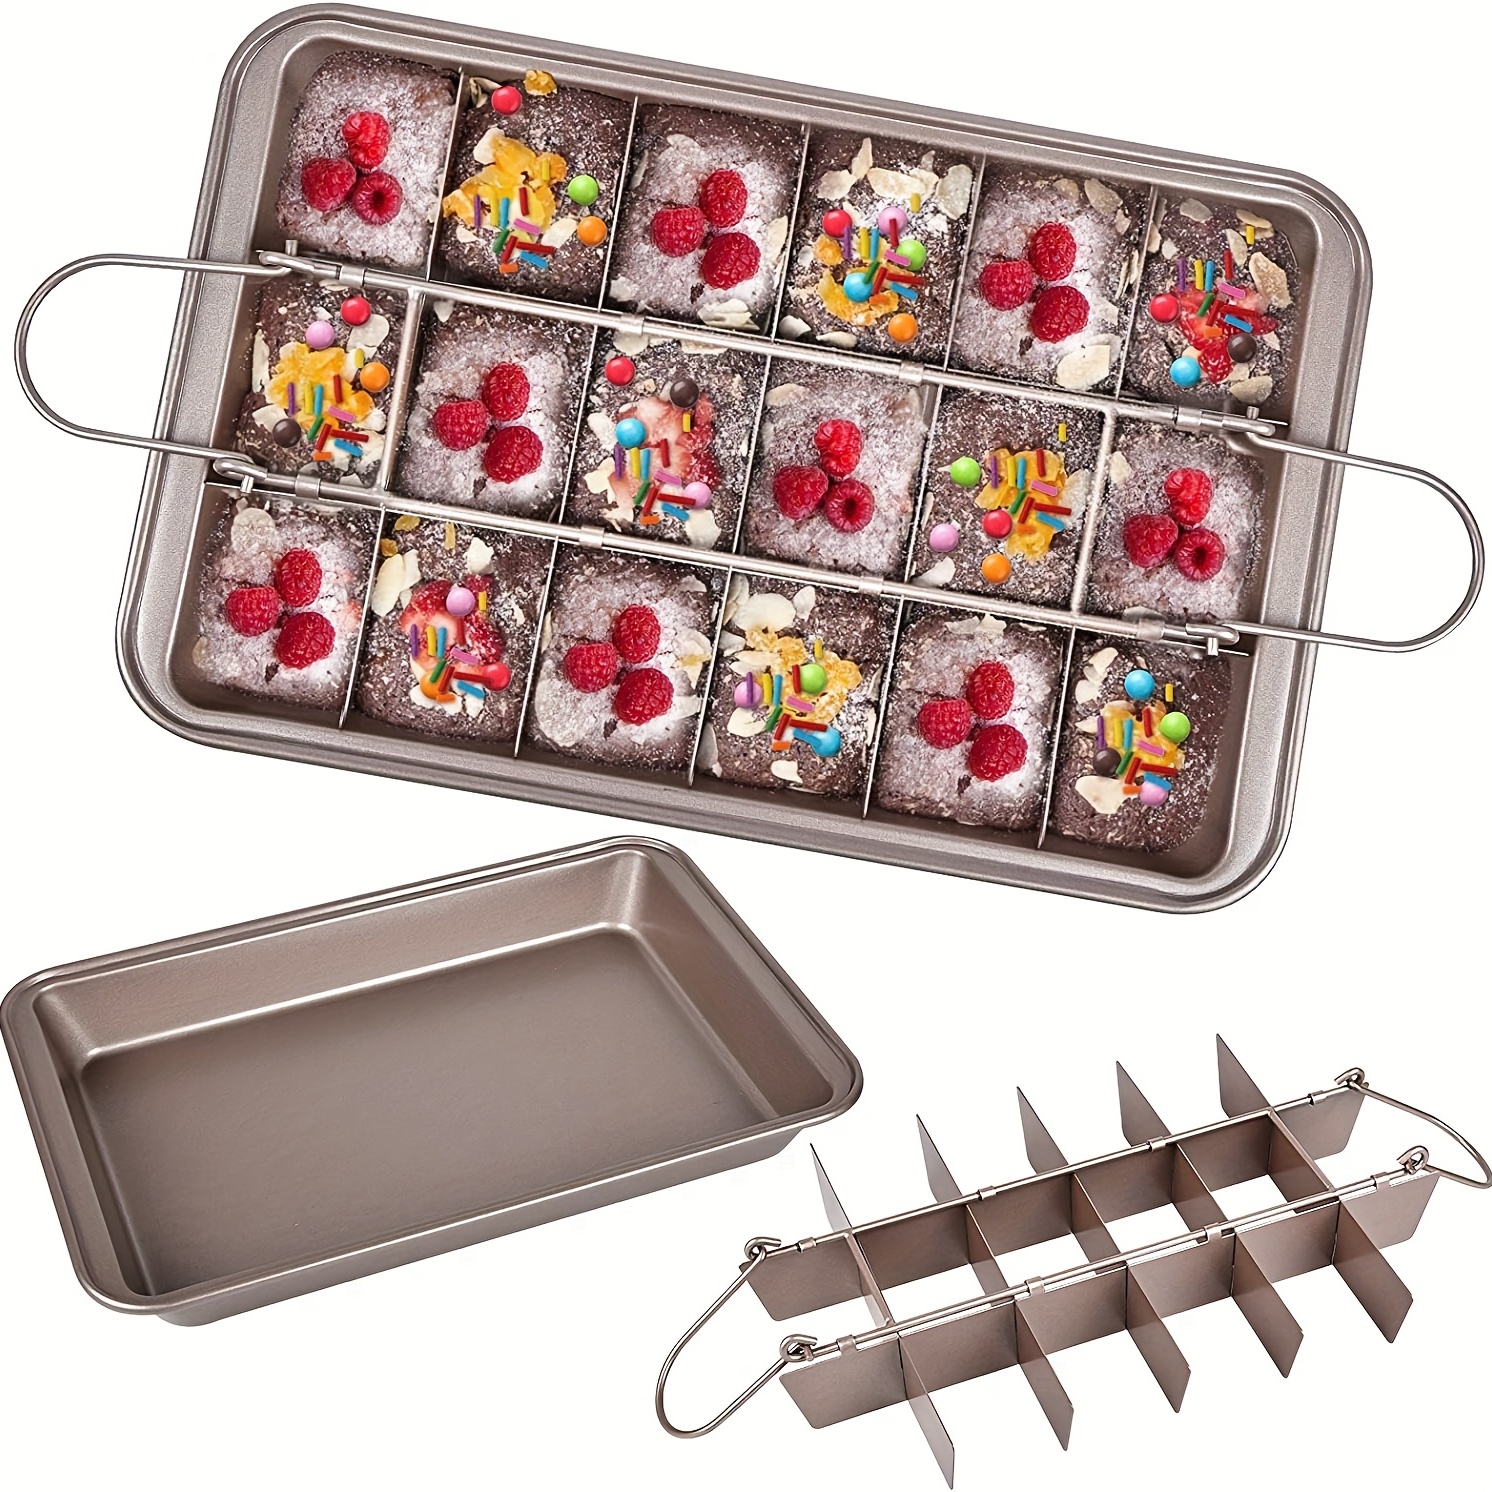 

1pc Non-stick Carbon Steel Brownie Cake Baking Pan - 31x20x4cm Square Divided Grid Cake Mold For Perfectly Baked Brownies